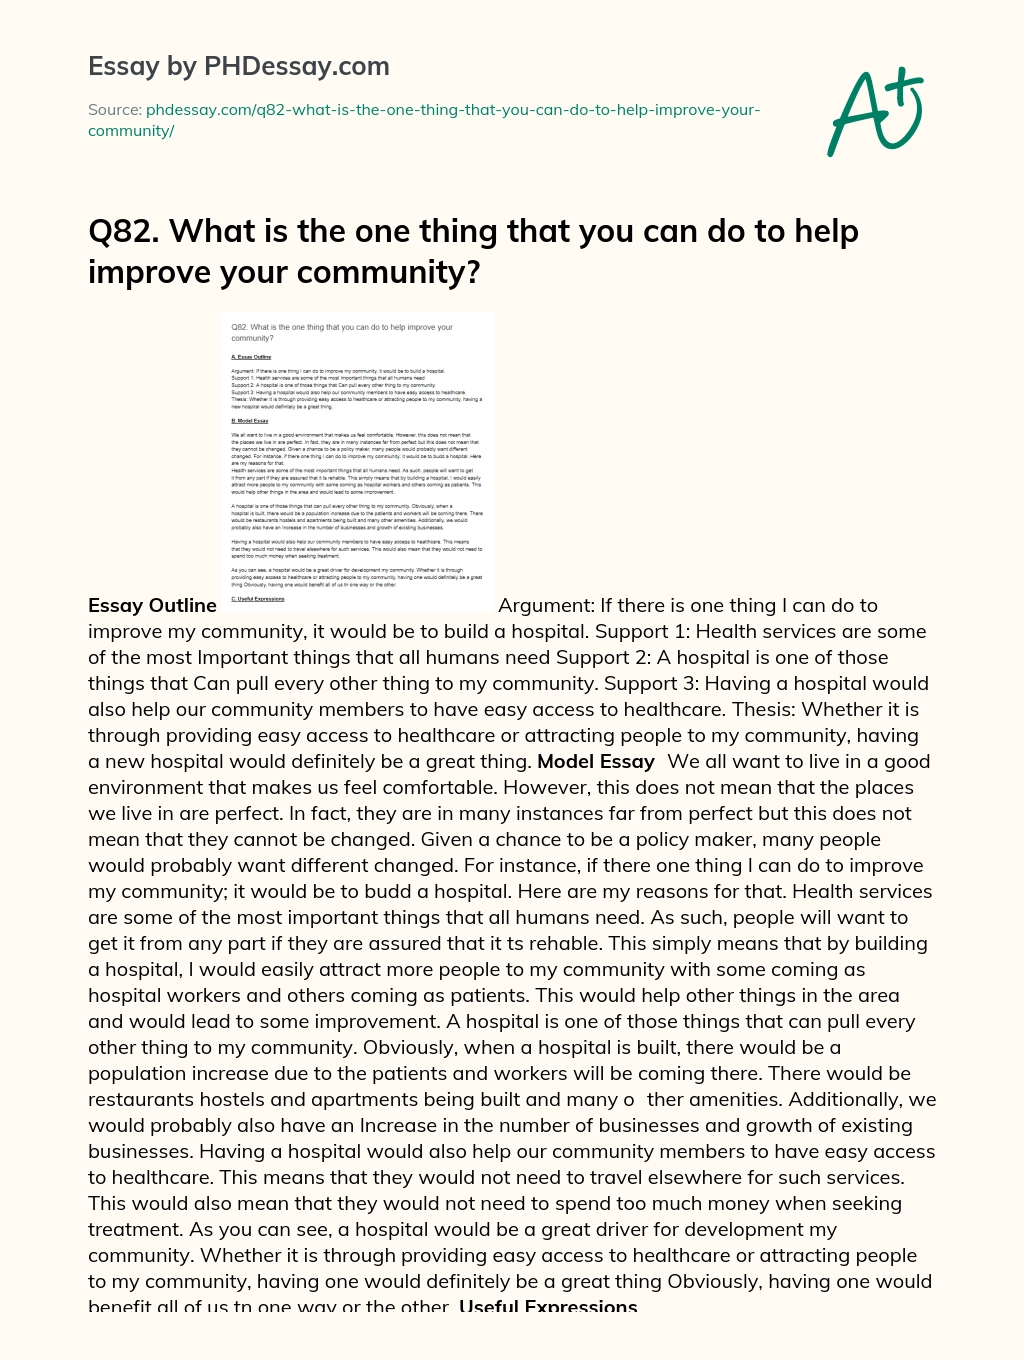 Q82. What is the one thing that you can do to help improve your community? essay